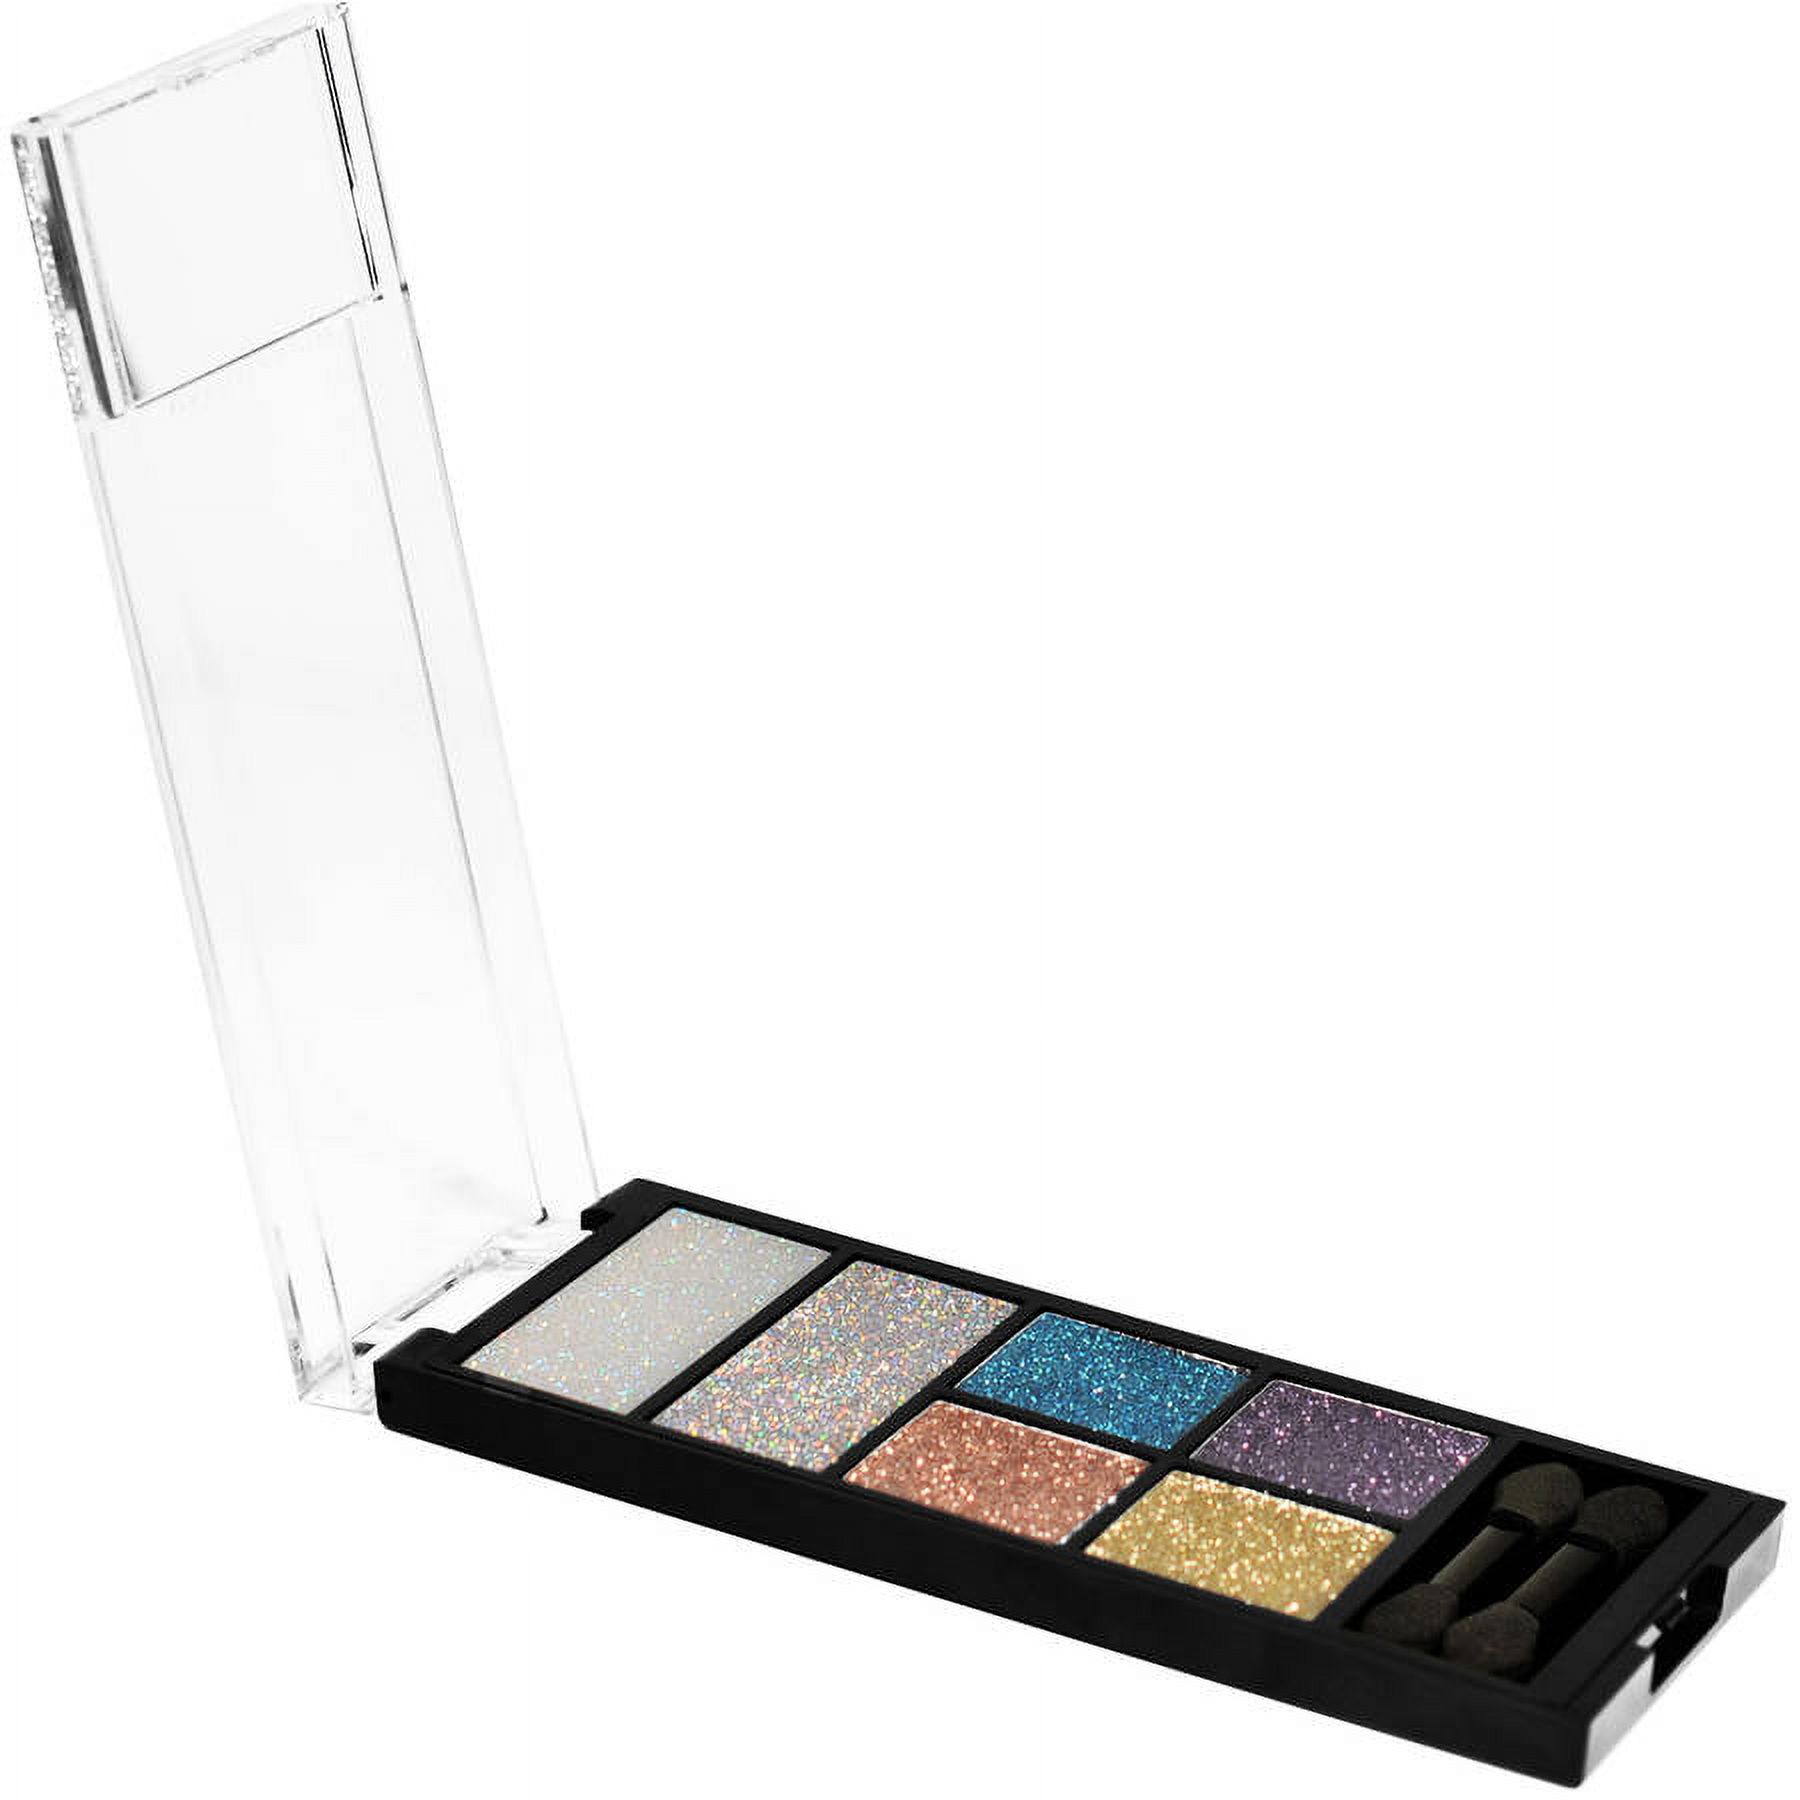 Hard Candy Glitteratzi Compact Eye Shadow, Call Me Sparkles, 5.63 oz - image 2 of 3